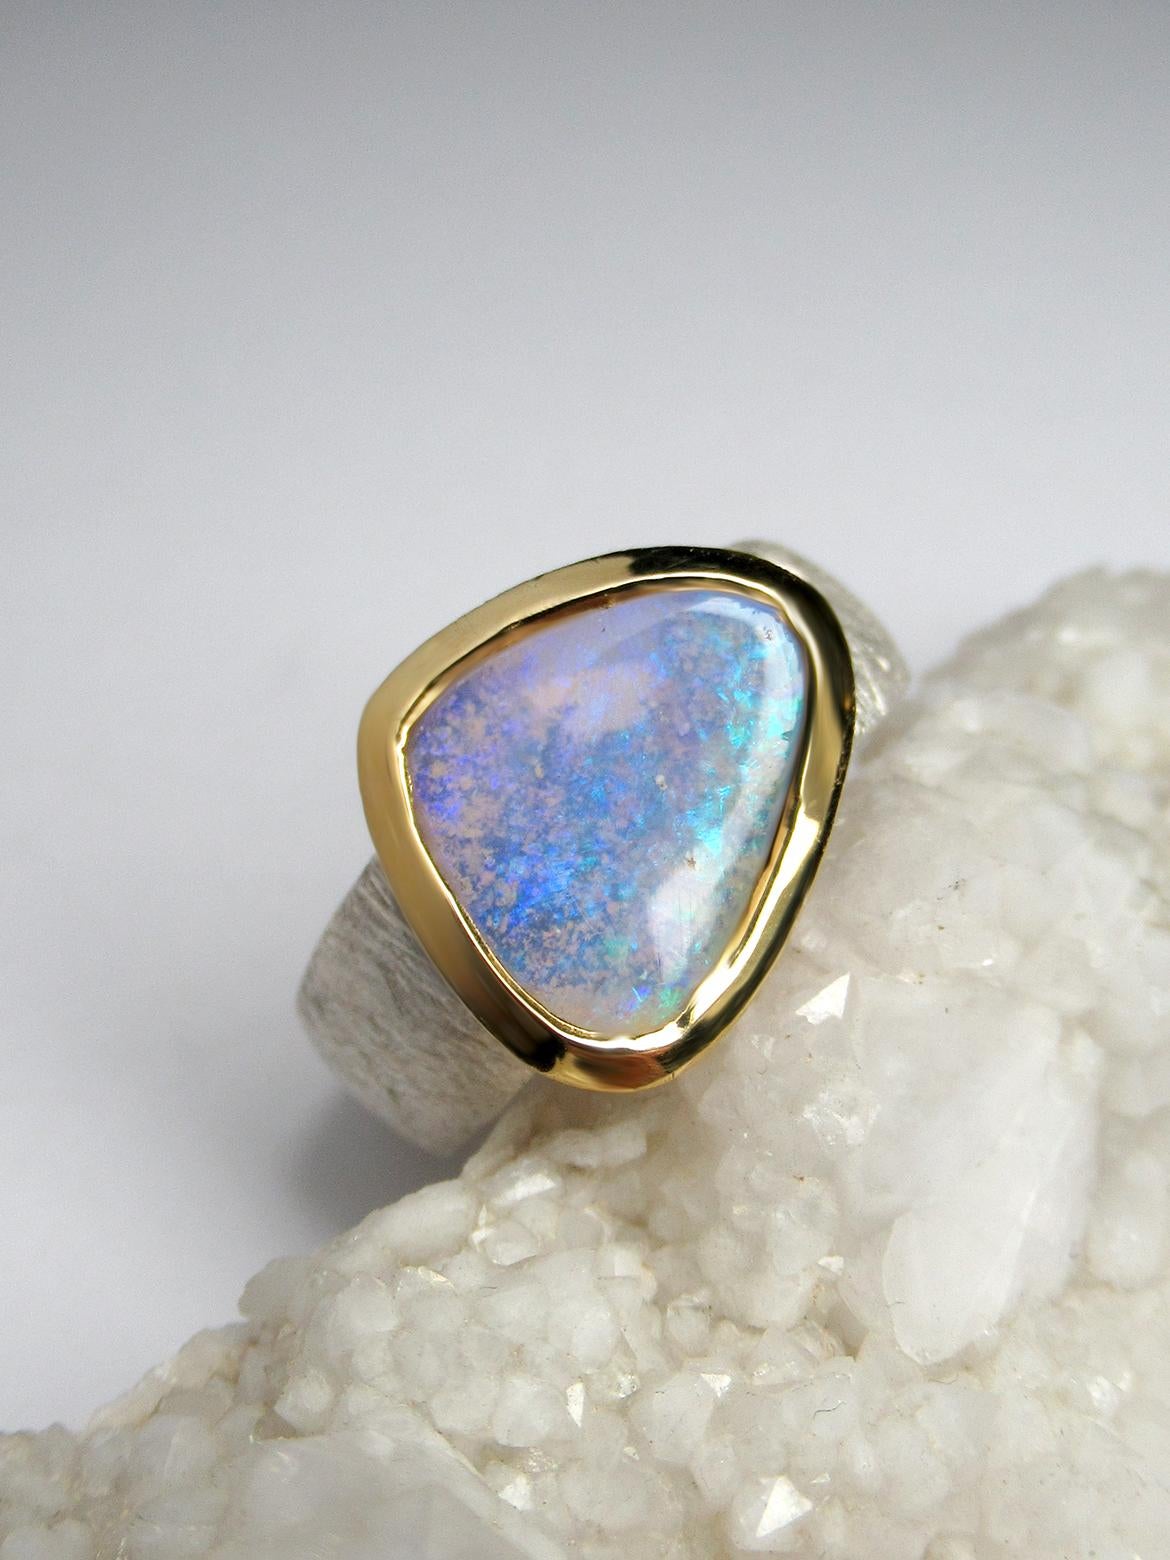 Australian Crystal Opal Ring Silver 18K Gold neon wedding anniversary For Sale 2